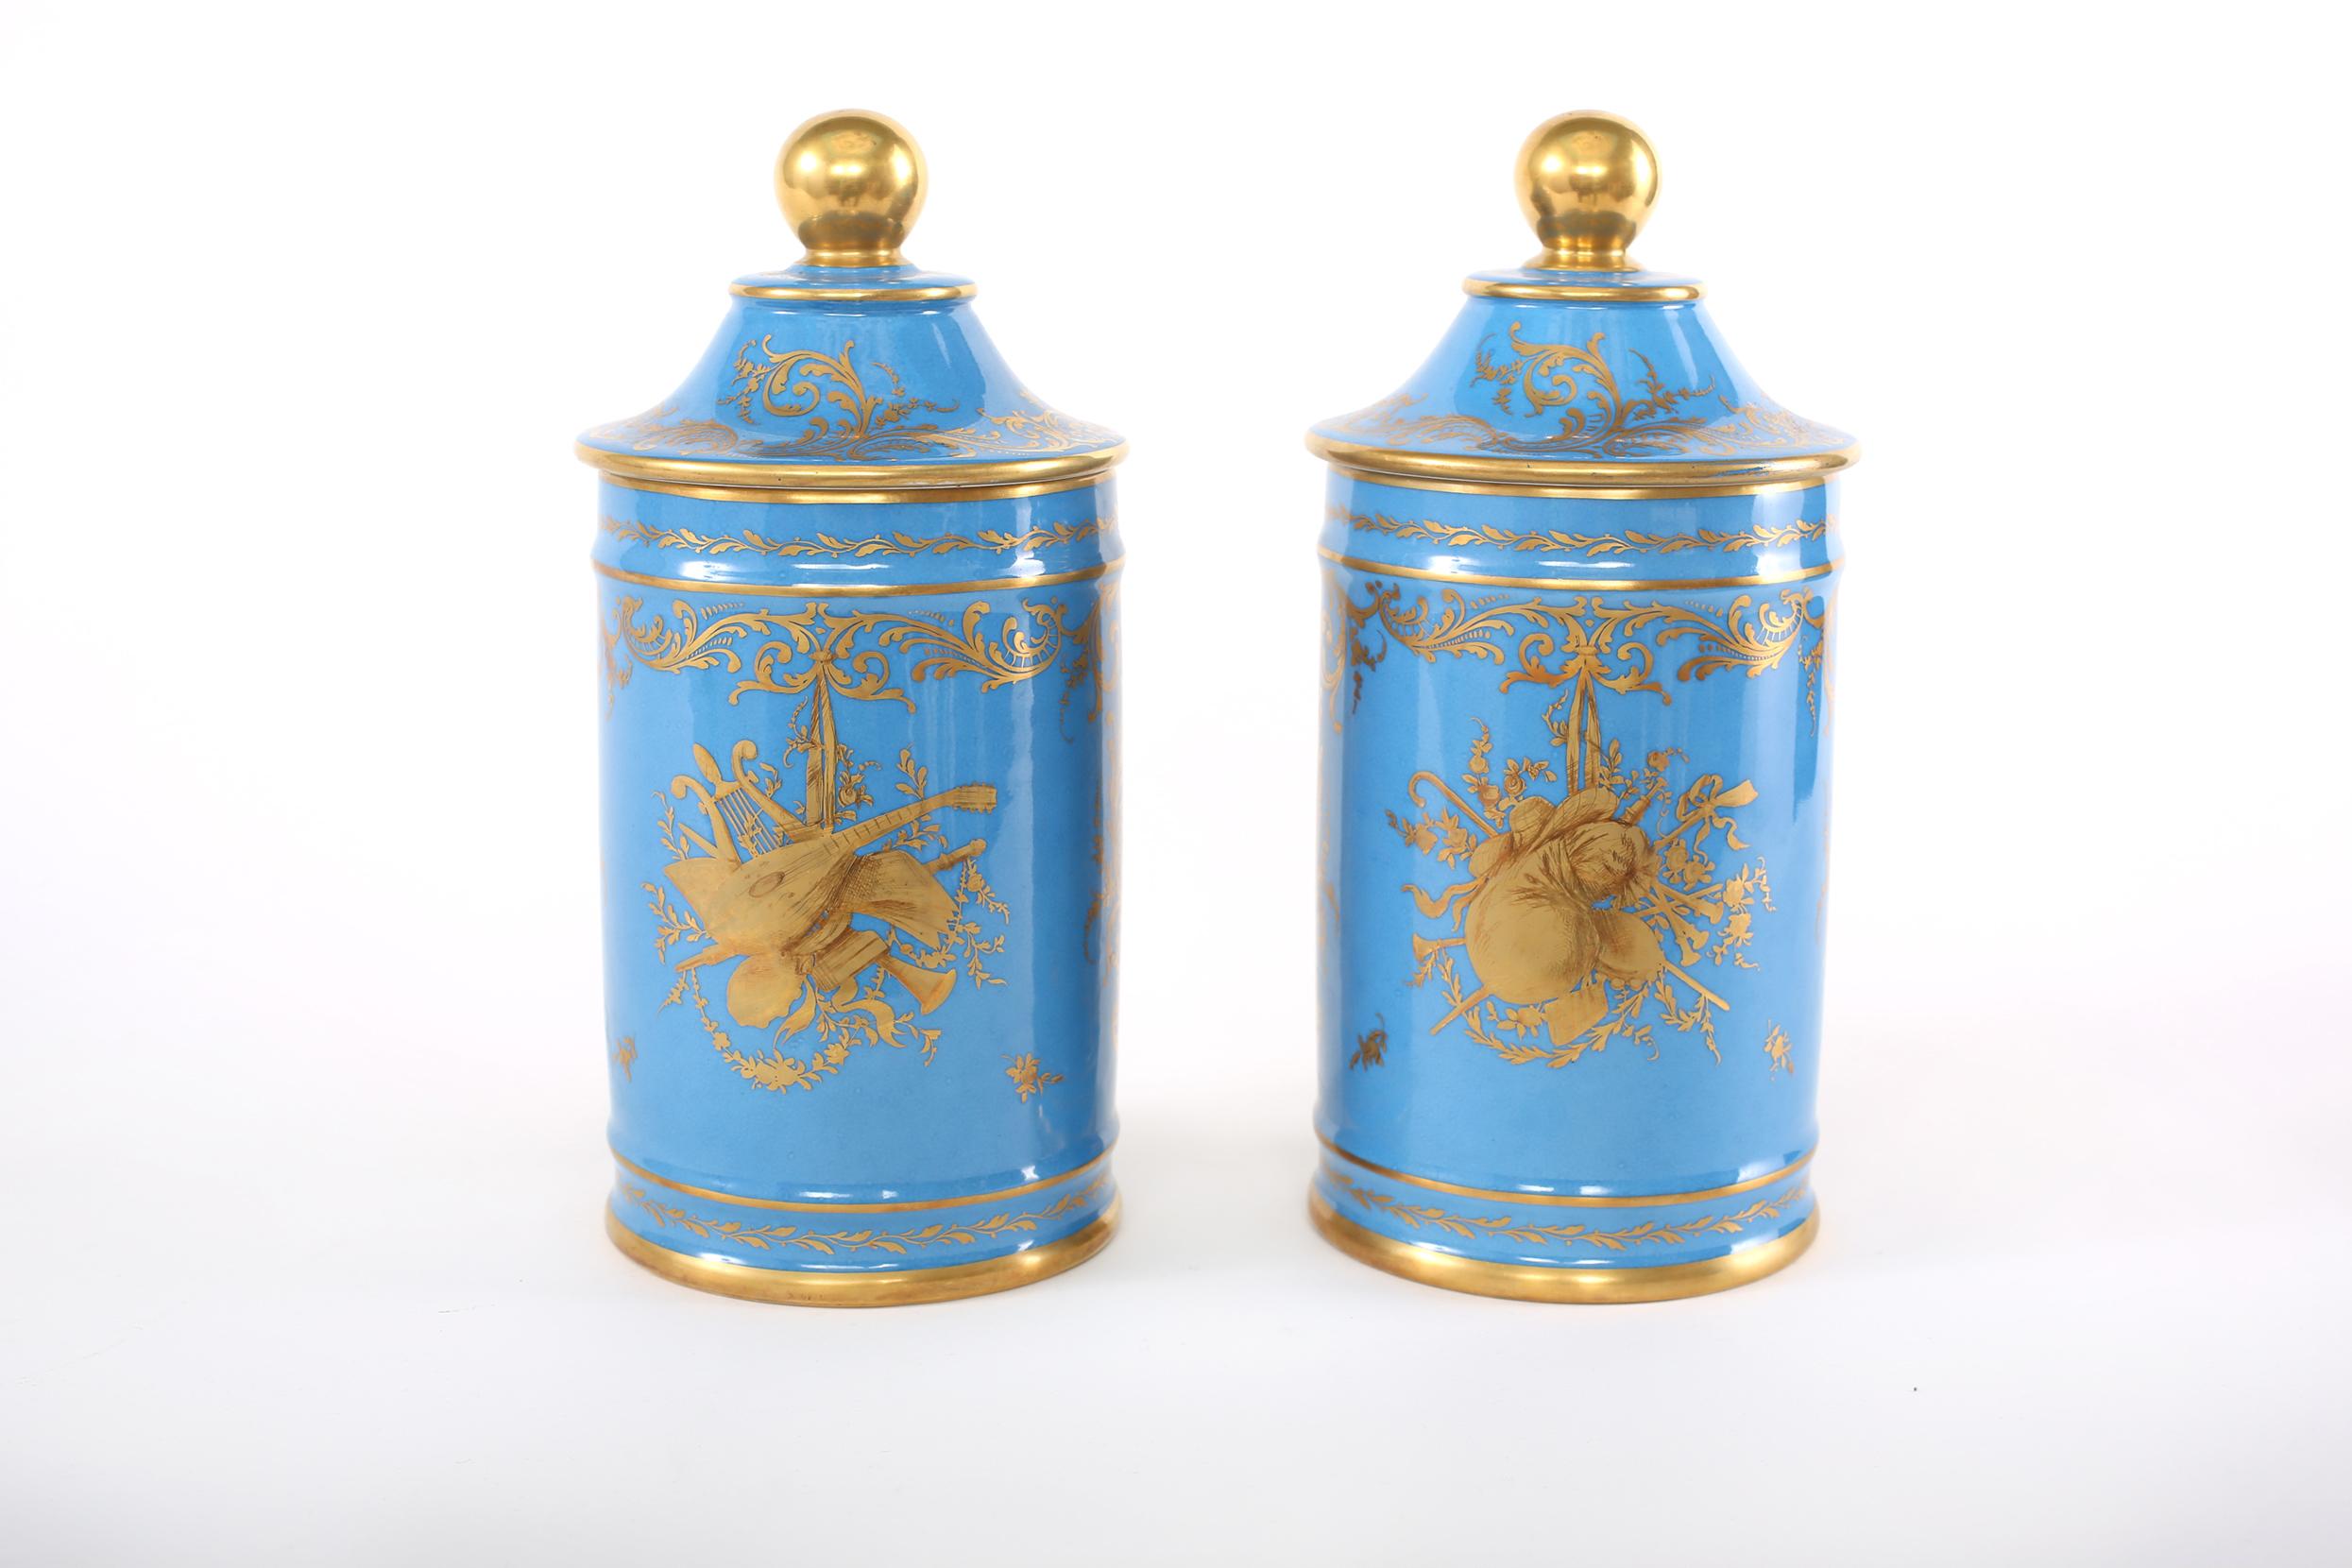 Mid 19th century pair of Sevres-style gilt porcelain covered jars with exterior painted scene design details. Each piece is in good condition. Minor wear consistent with age / use. Maker's mark undersigned. Each piece / jar stands about 12-1/4